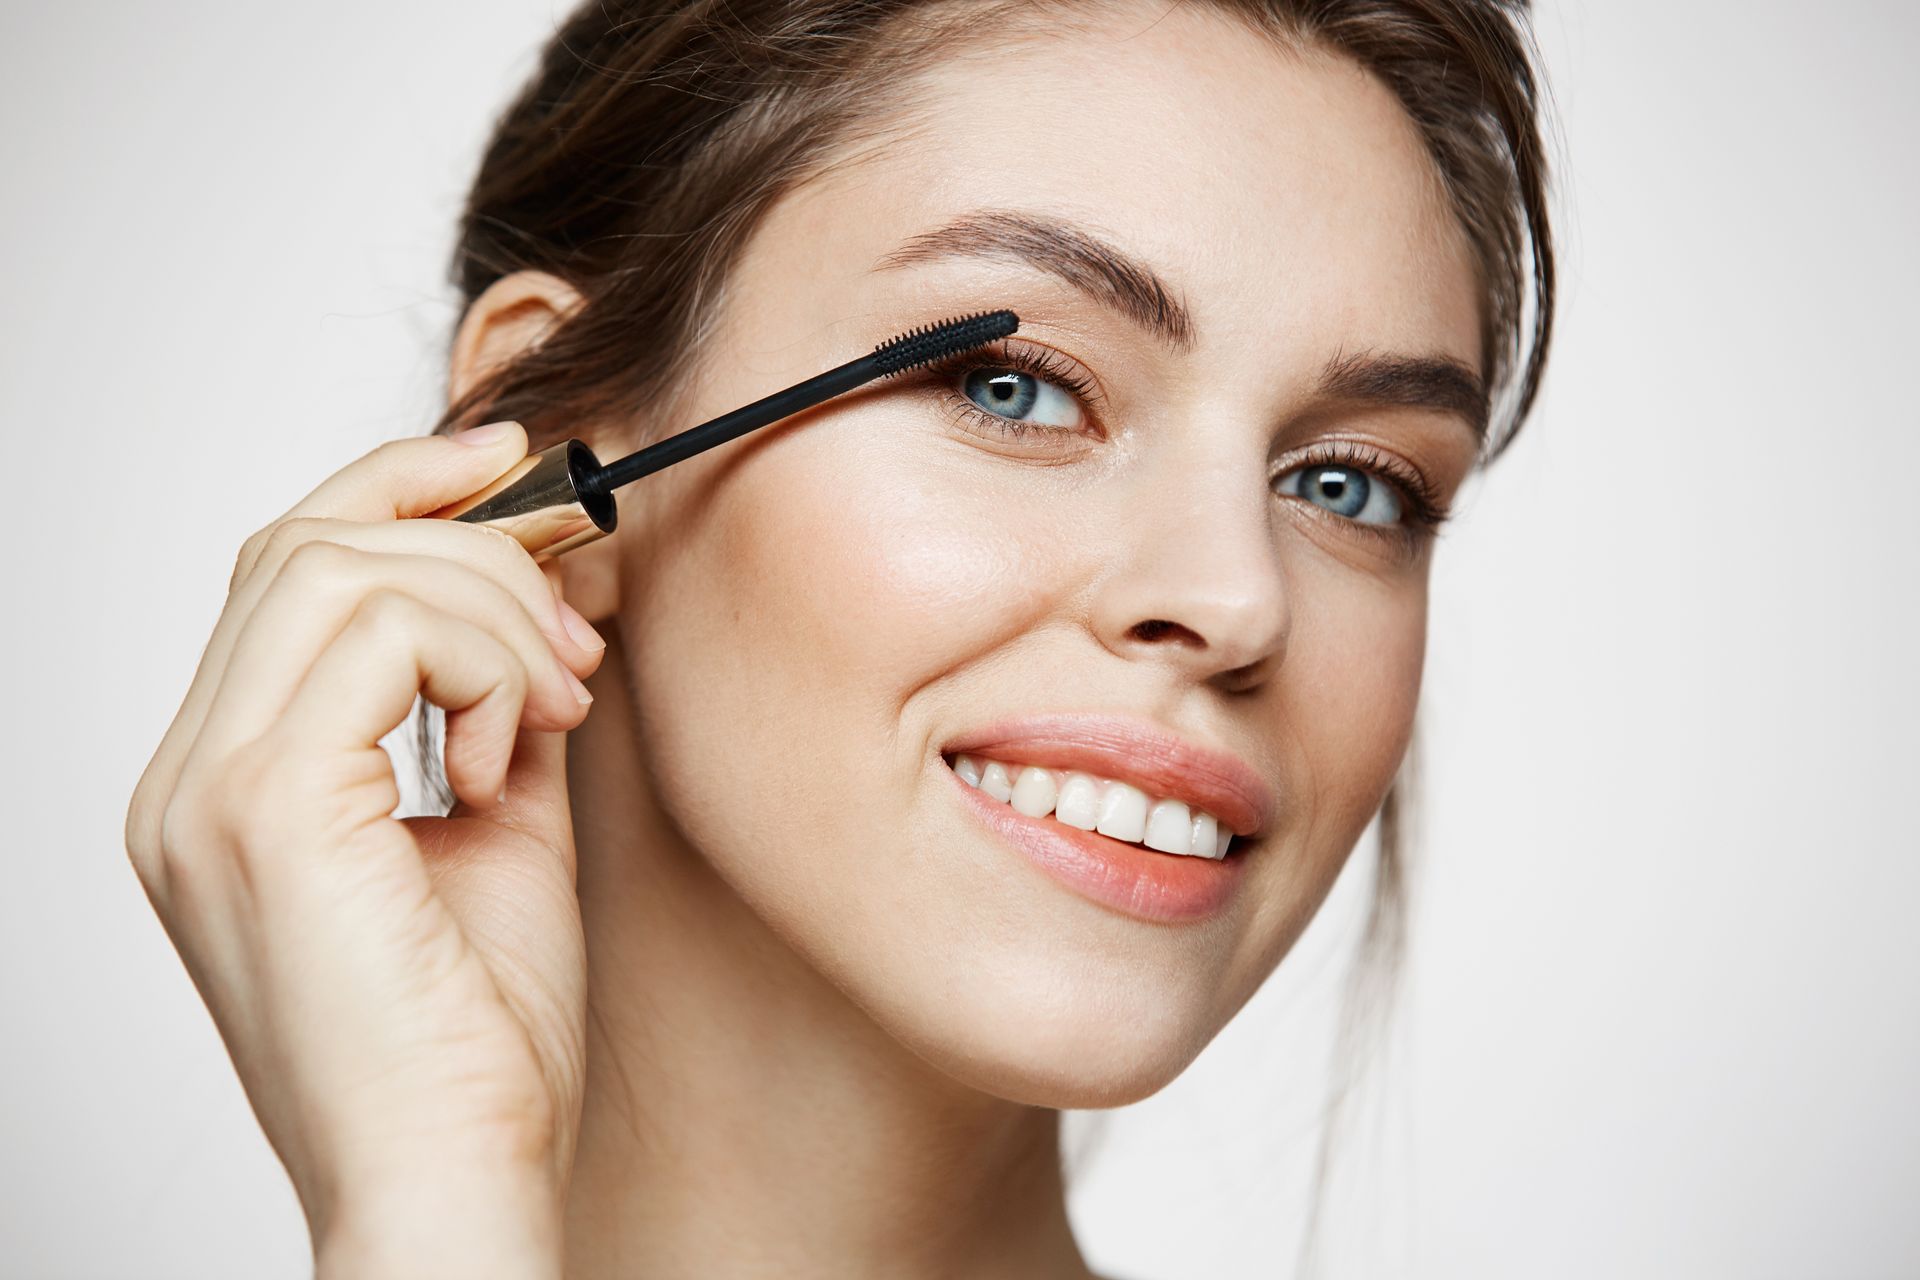 a woman is smiling while applying mascara to her eyelashes